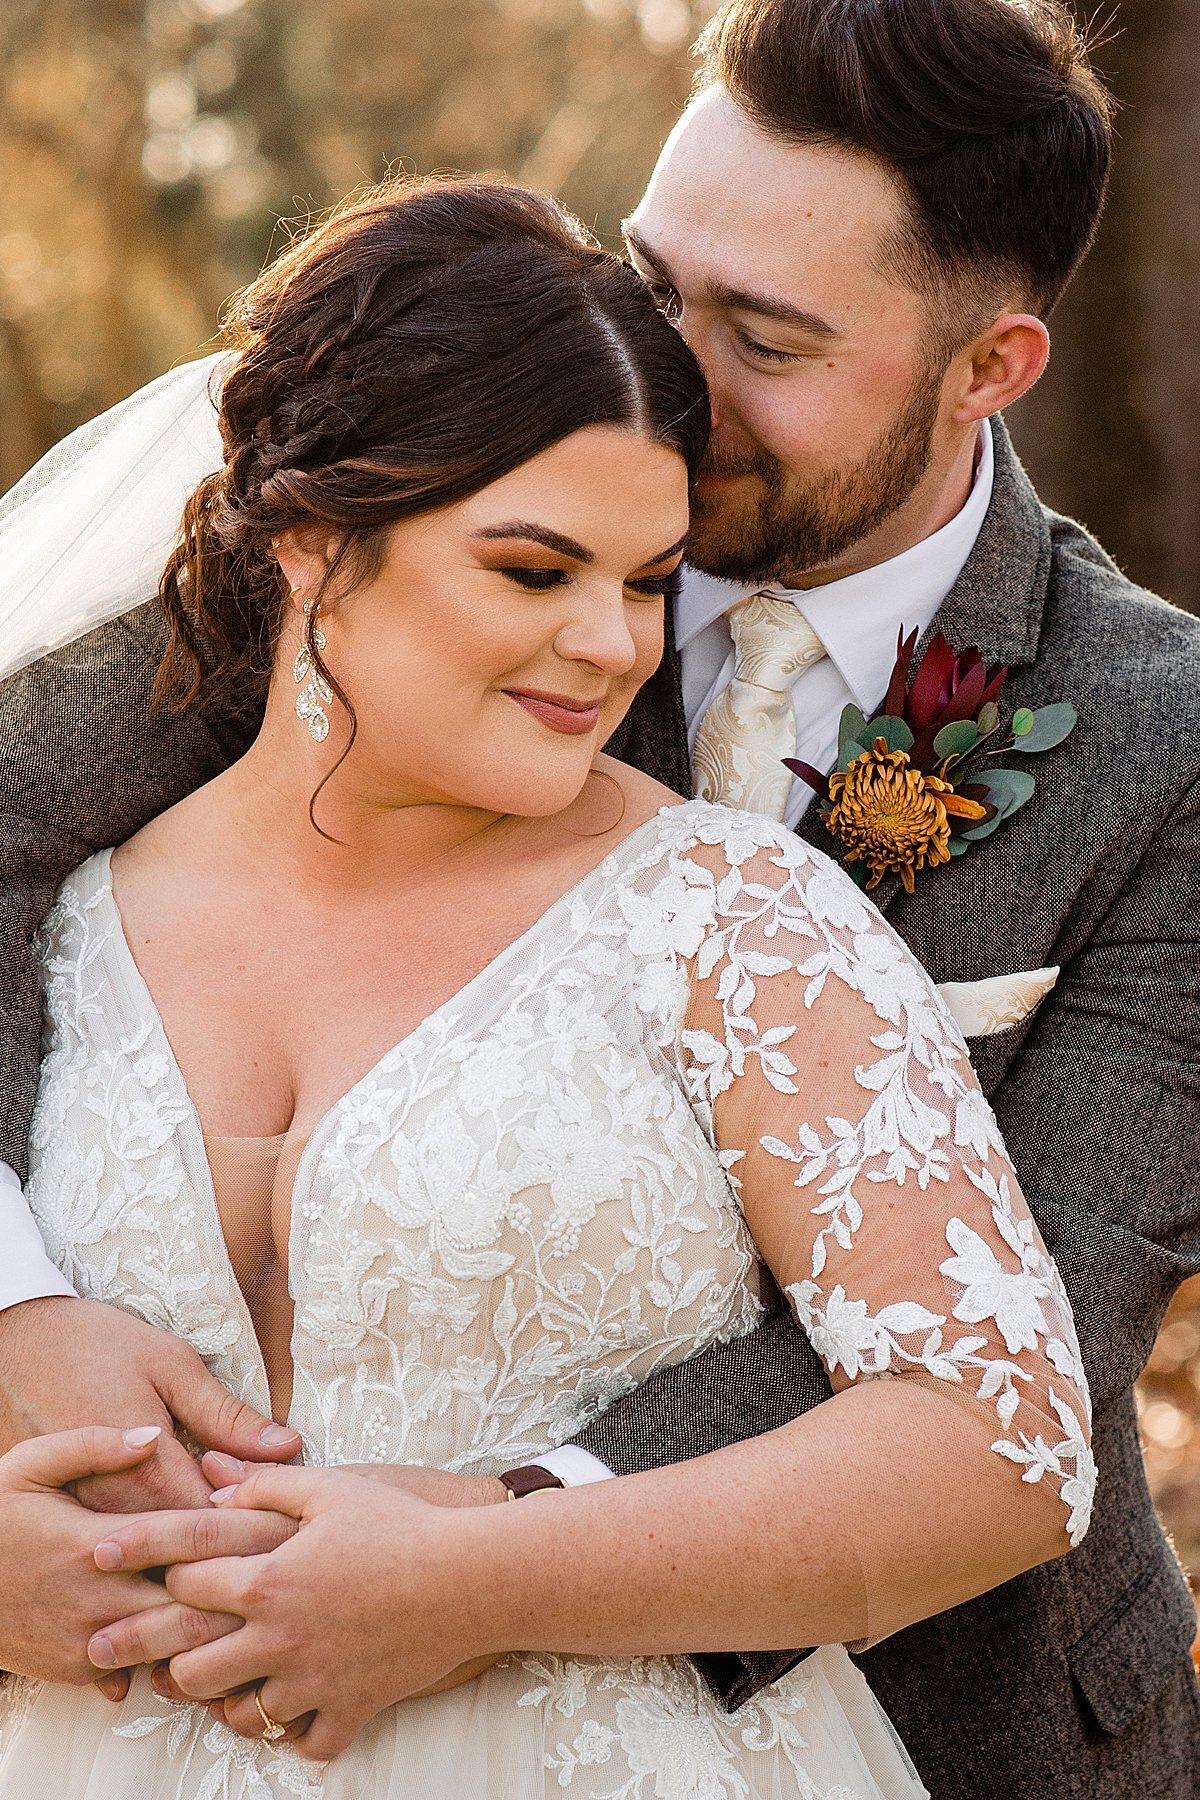 Bride wearing long sleeve lace dress and groom with a grey tweed suit holding his wife who has braids in her updo